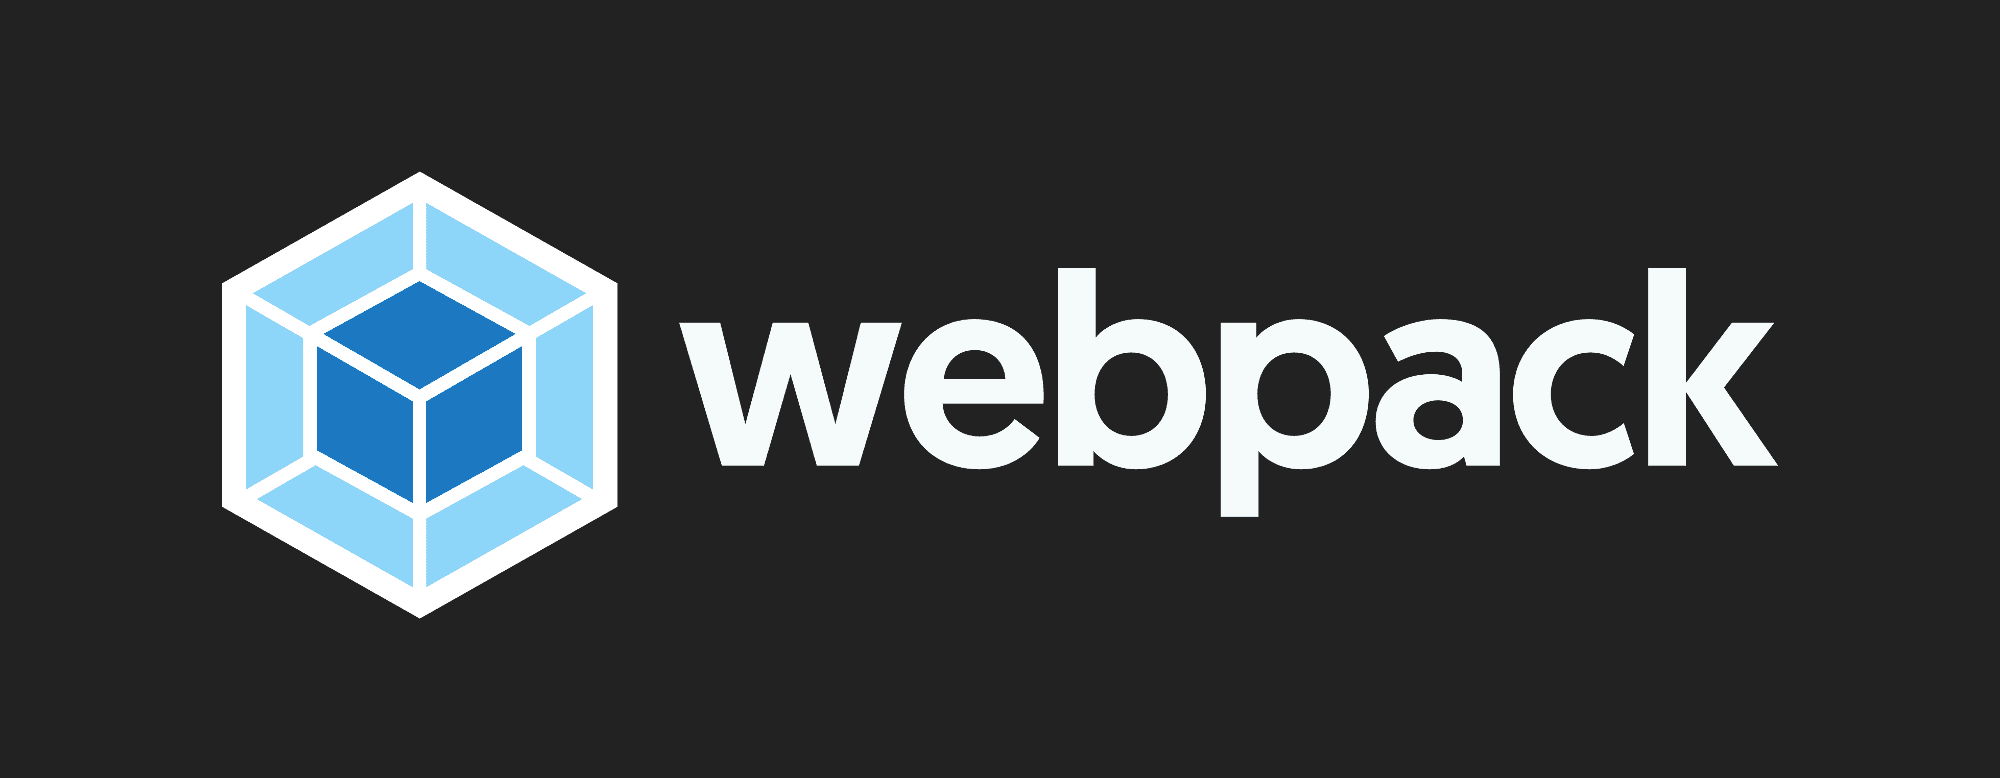 How does Webpack pack your code?